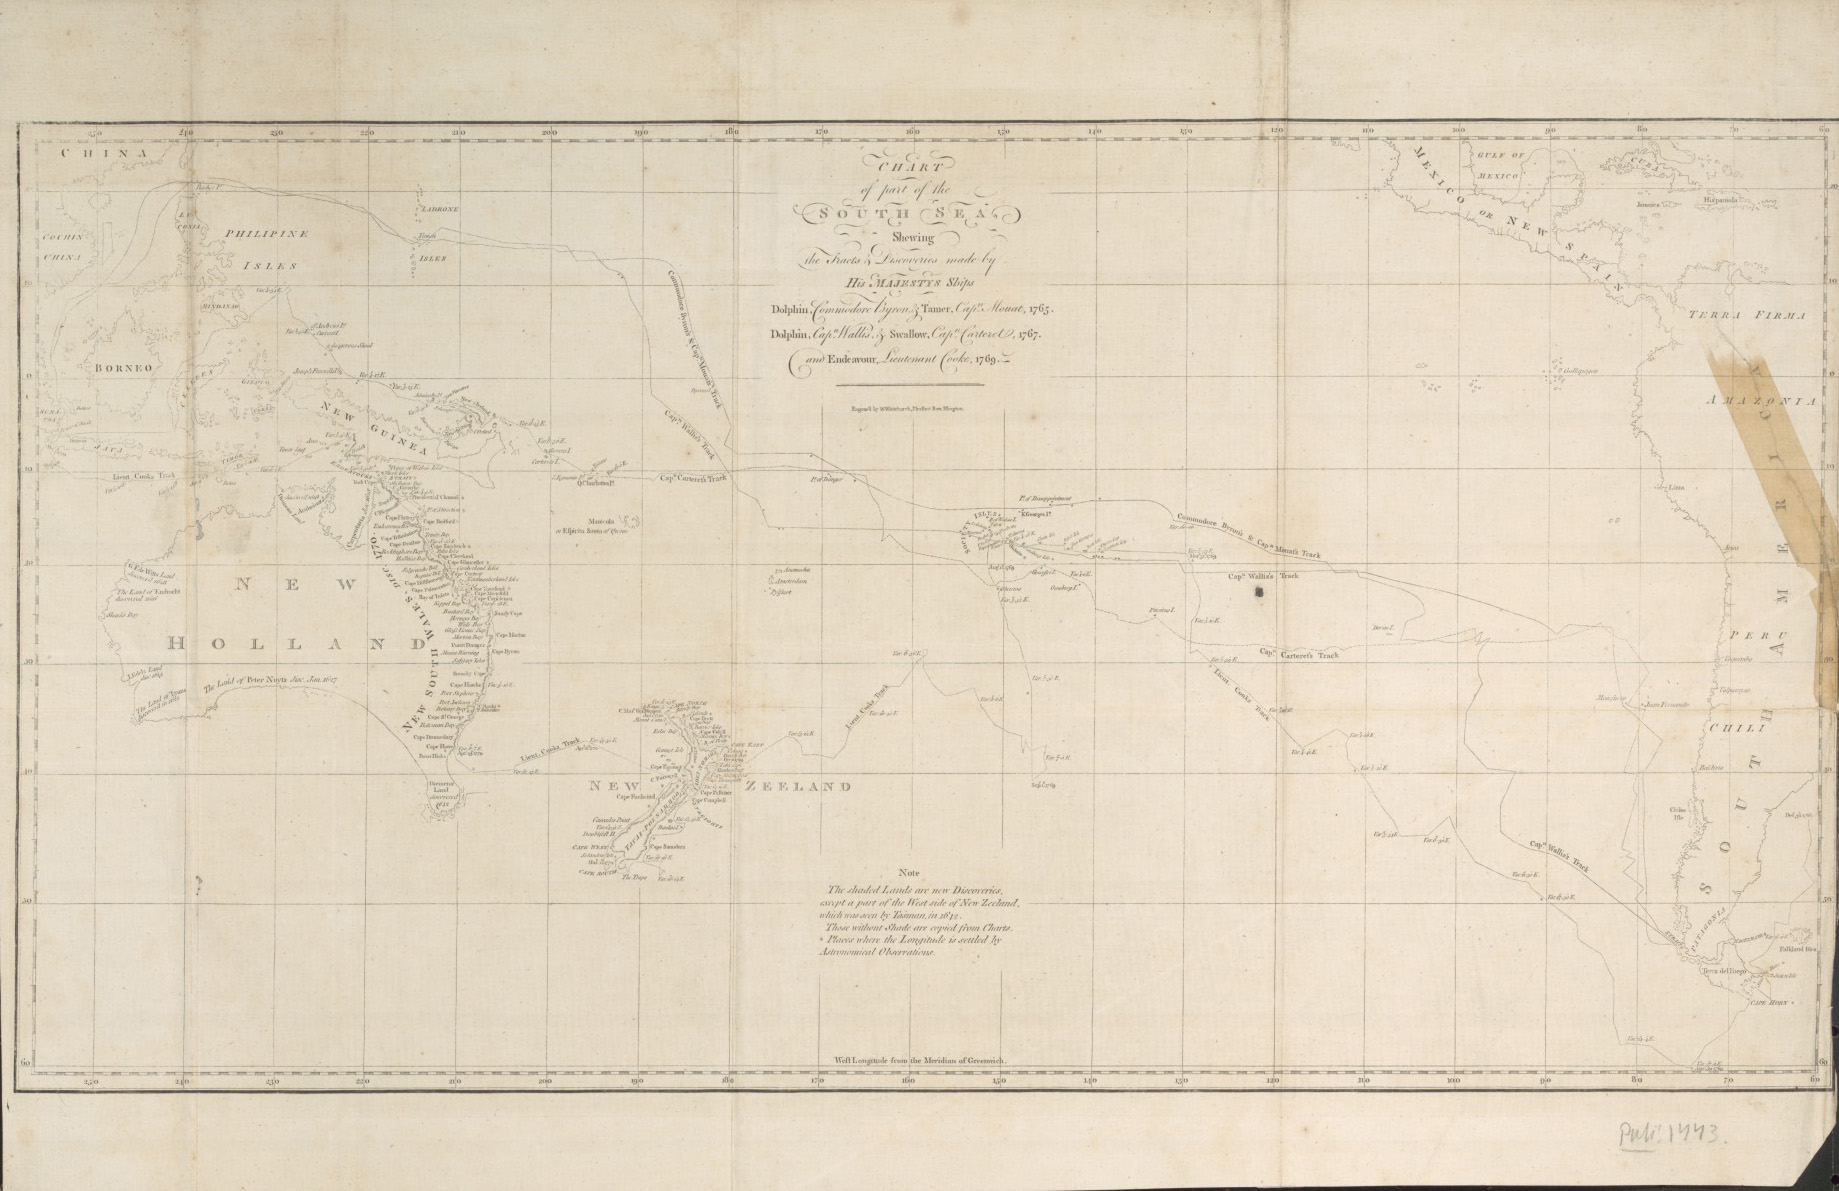 <p>‘Chart of part of the South Sea, Shewing the Tracts and Discoveries made by His Majesty’s Ships, 1773’</p>
